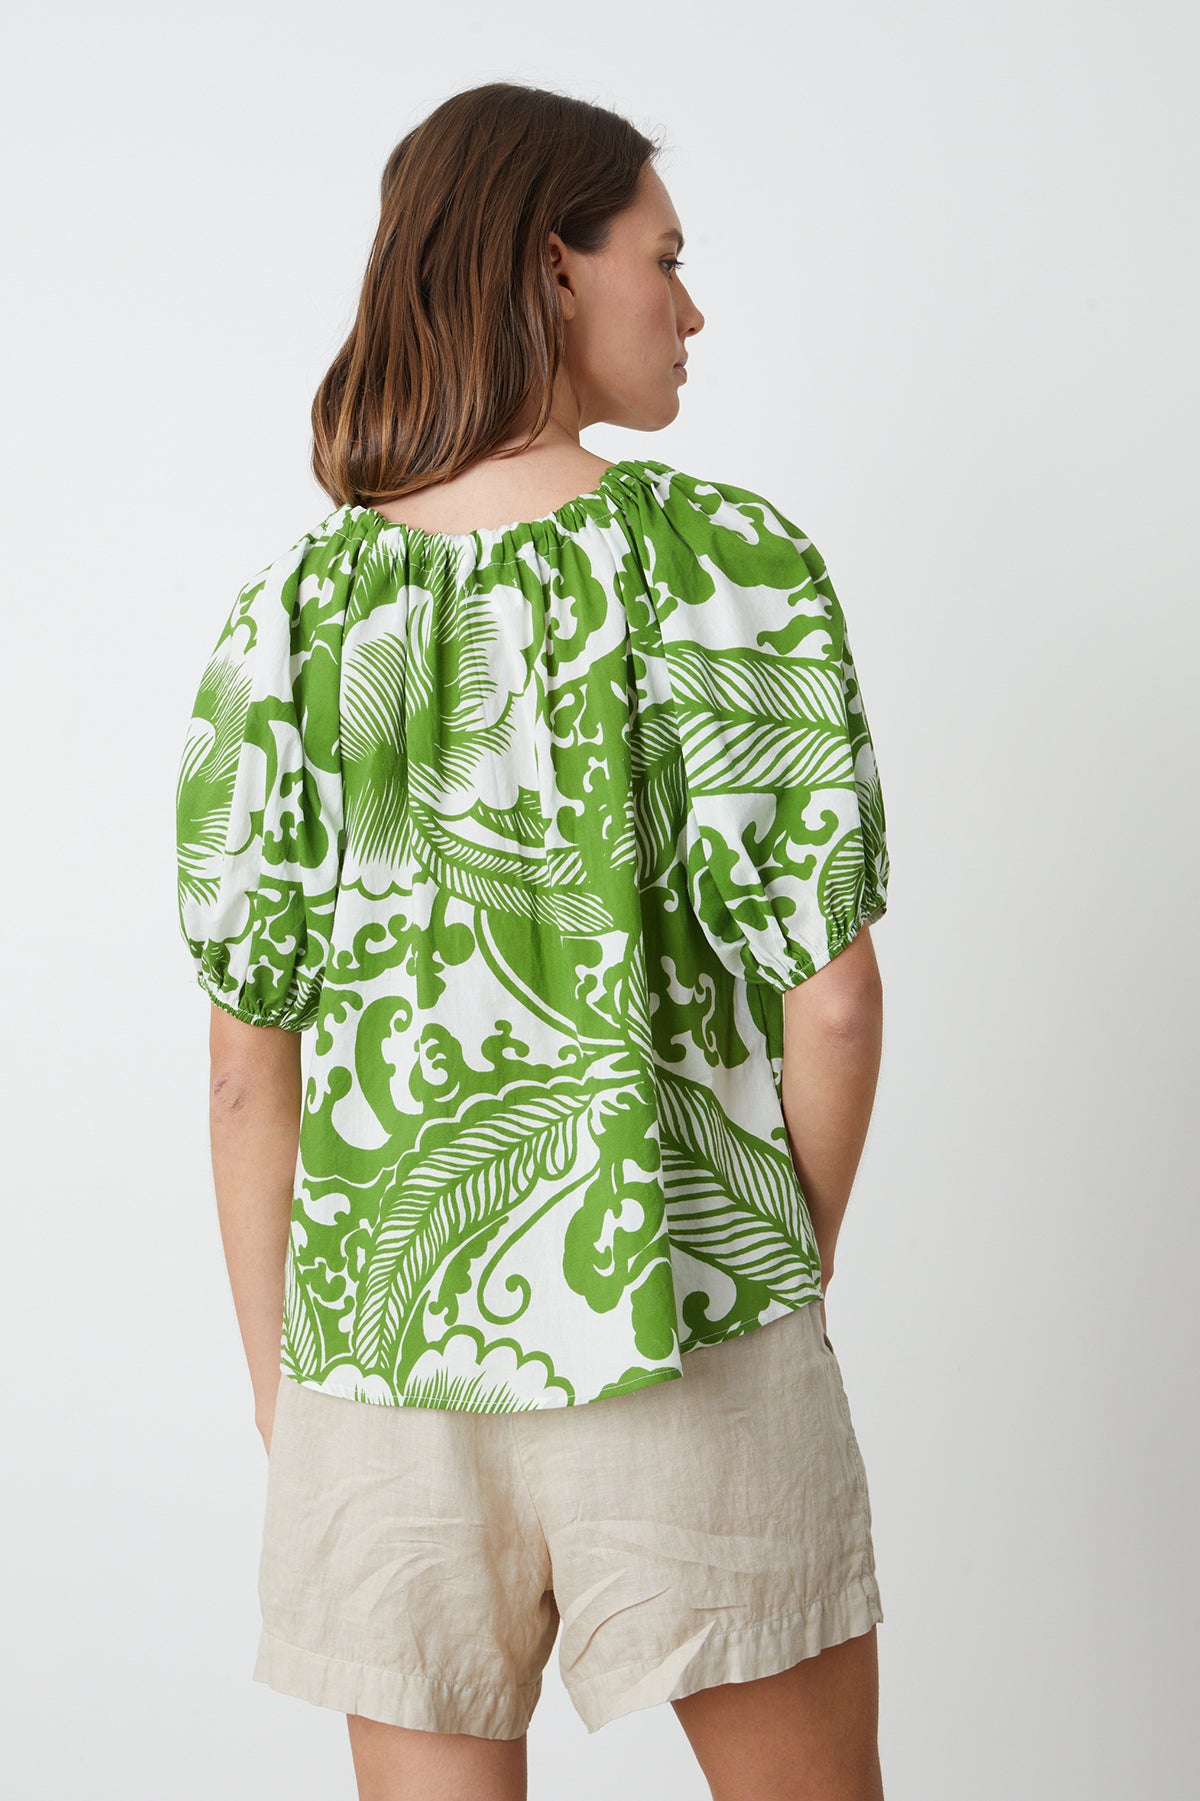   the back view of a woman wearing a Velvet by Graham & Spencer ANGELA PRINTED BOHO TOP. 